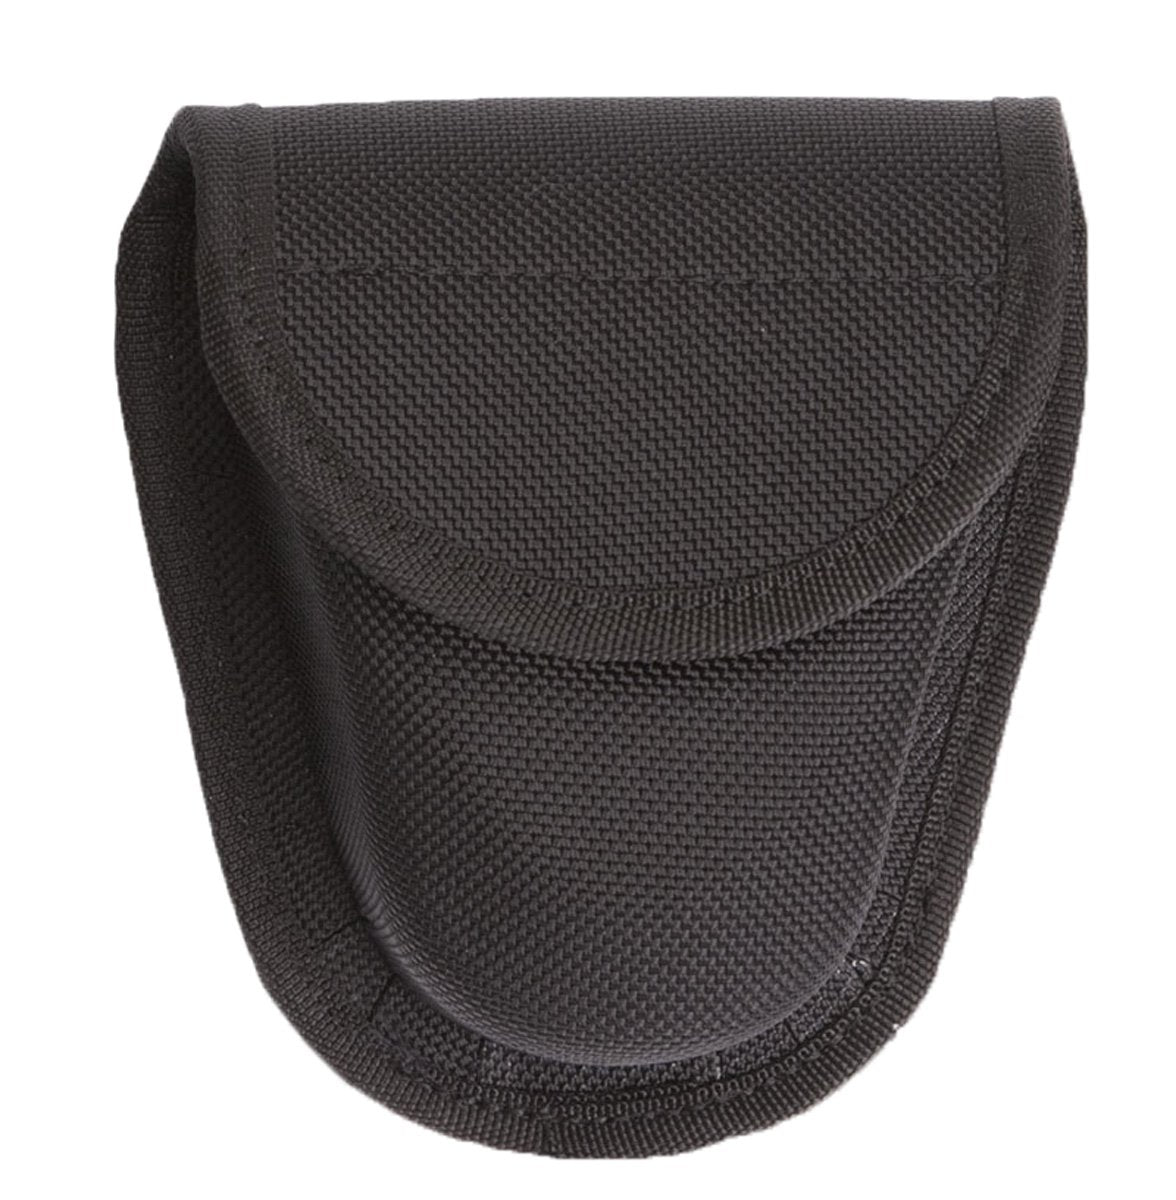 DuraTek Molded Handcuff Pouch with flap closure.